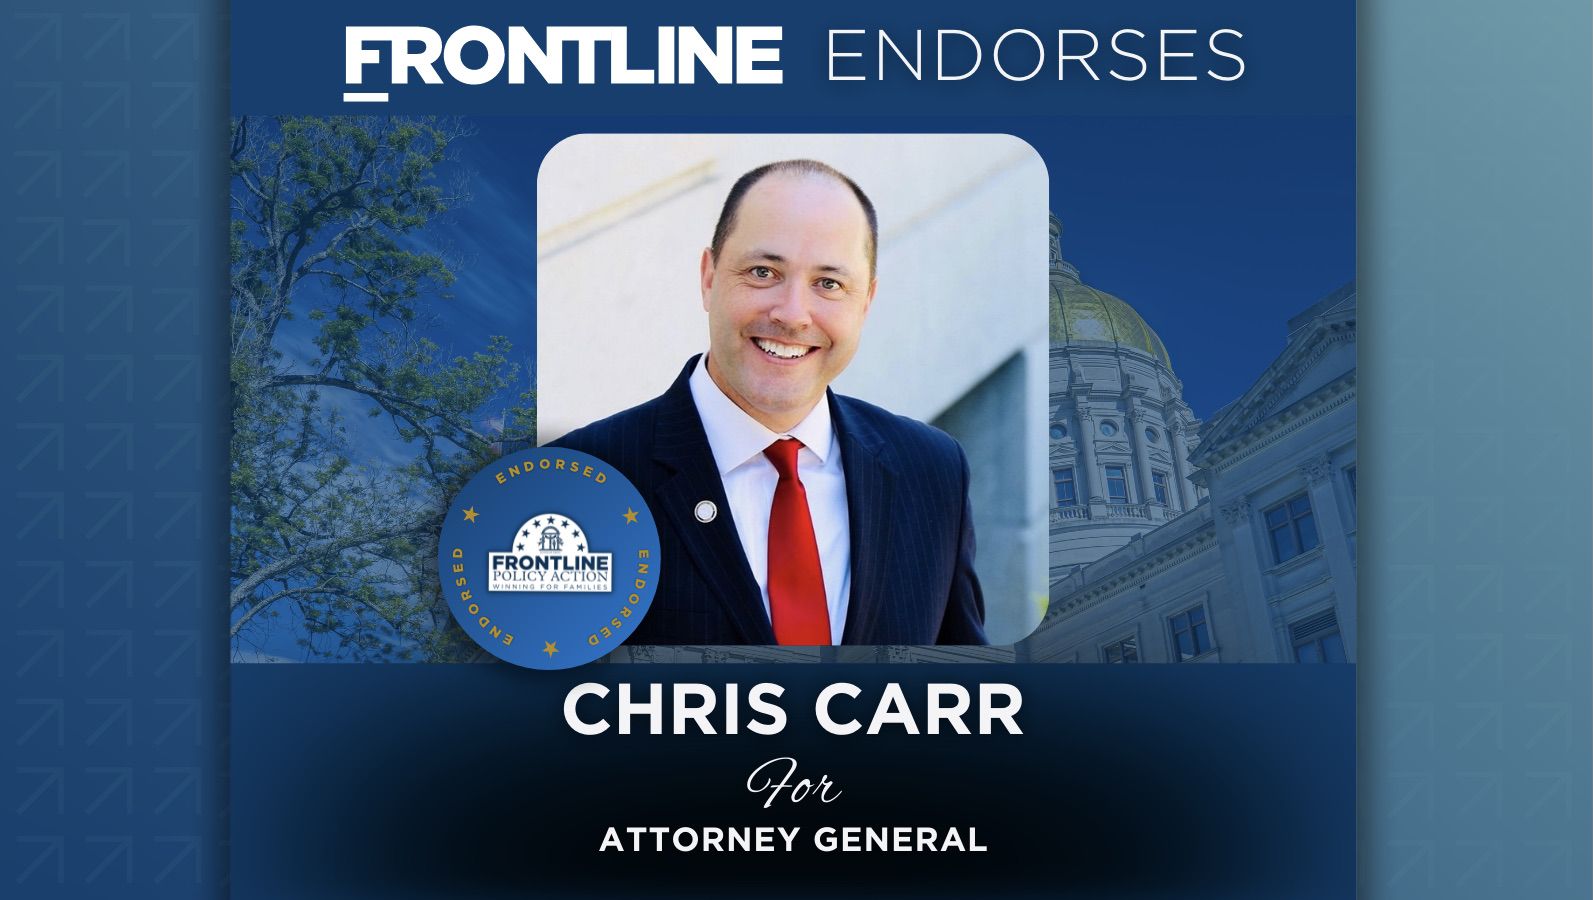 Frontline Endorses Chris Carr for Attorney General